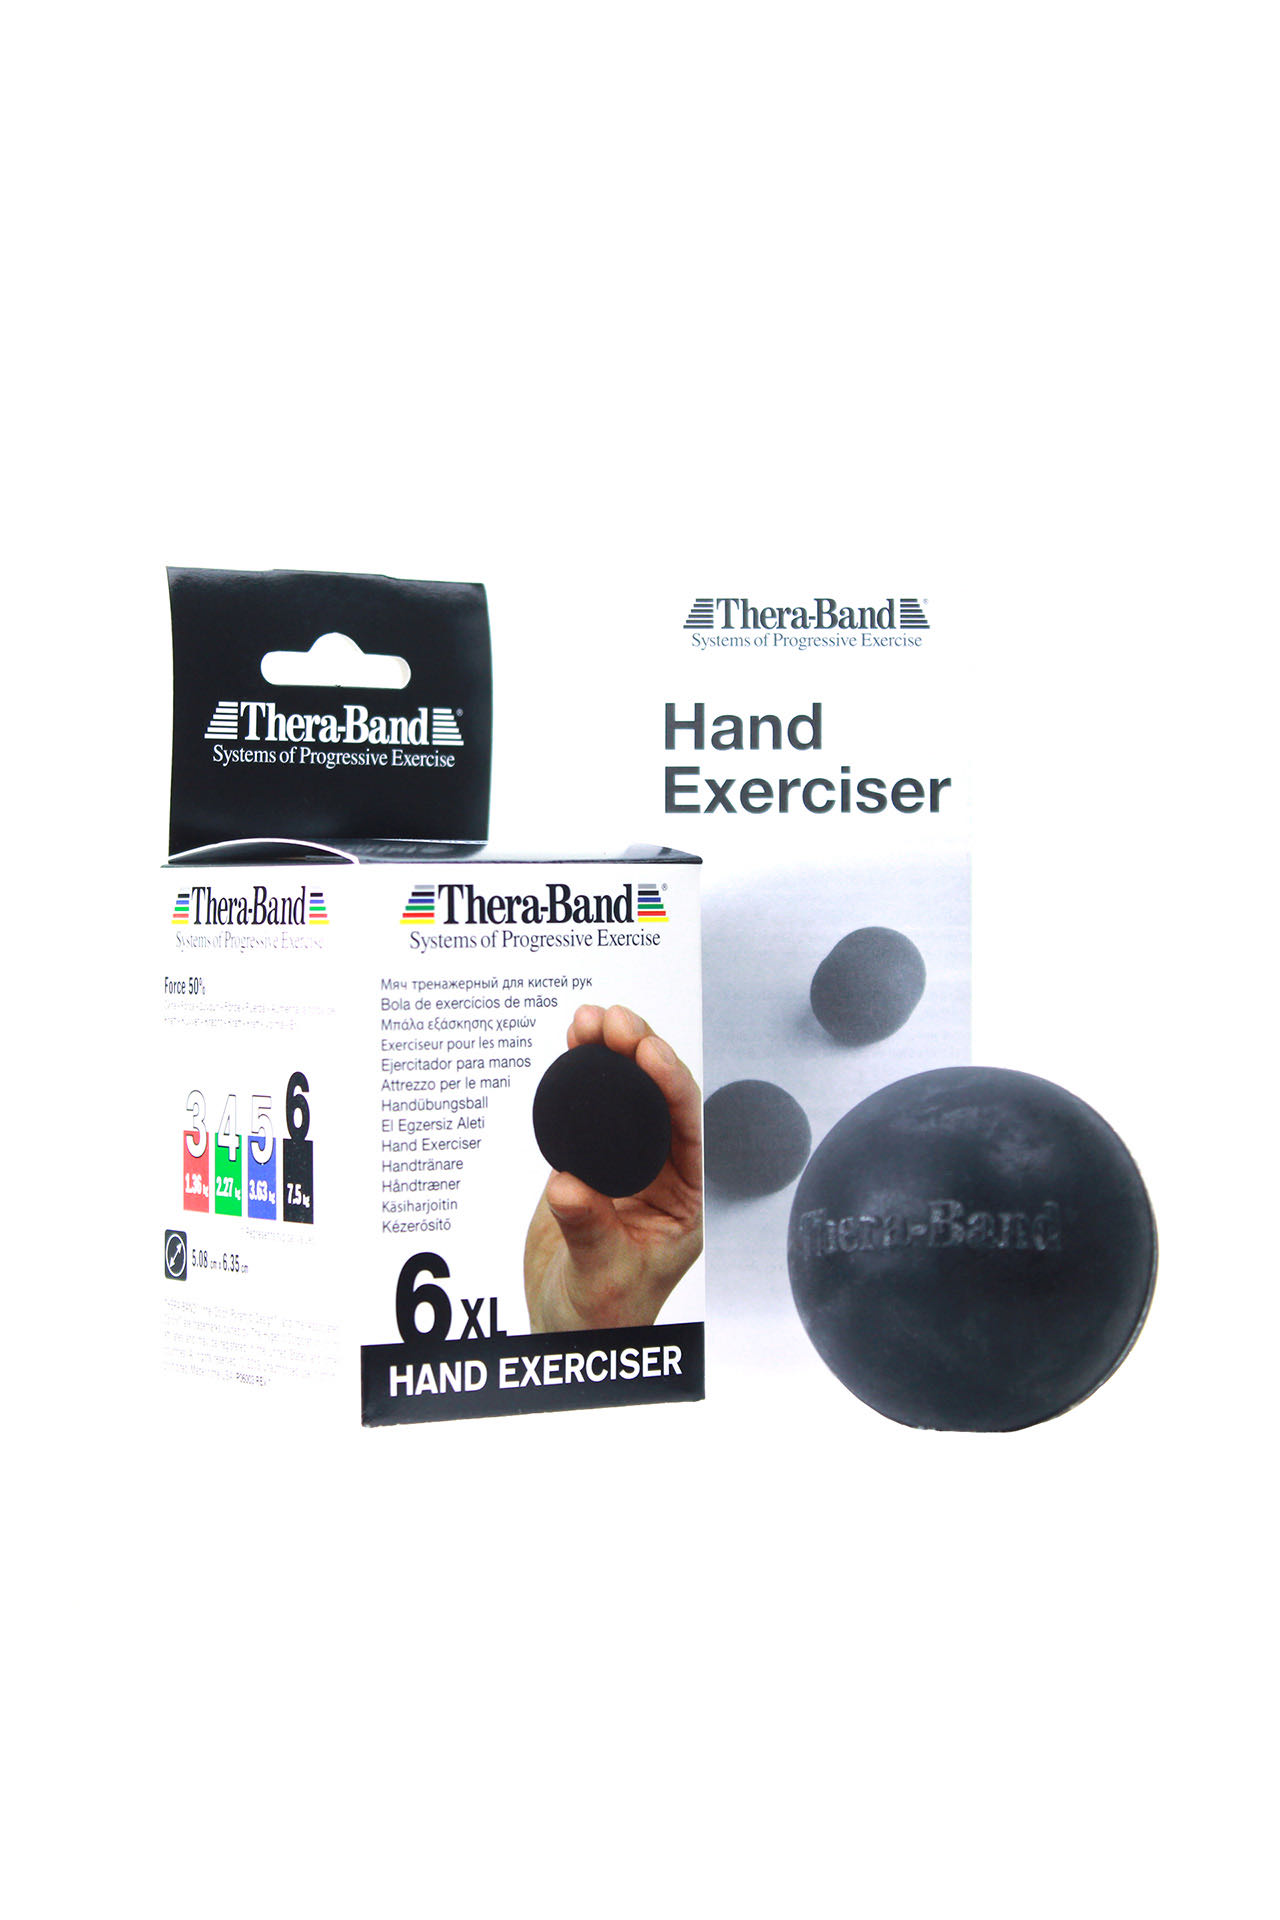 hand excersiser thera band black xl fengbao kung fu finger trainer shop wien 1080